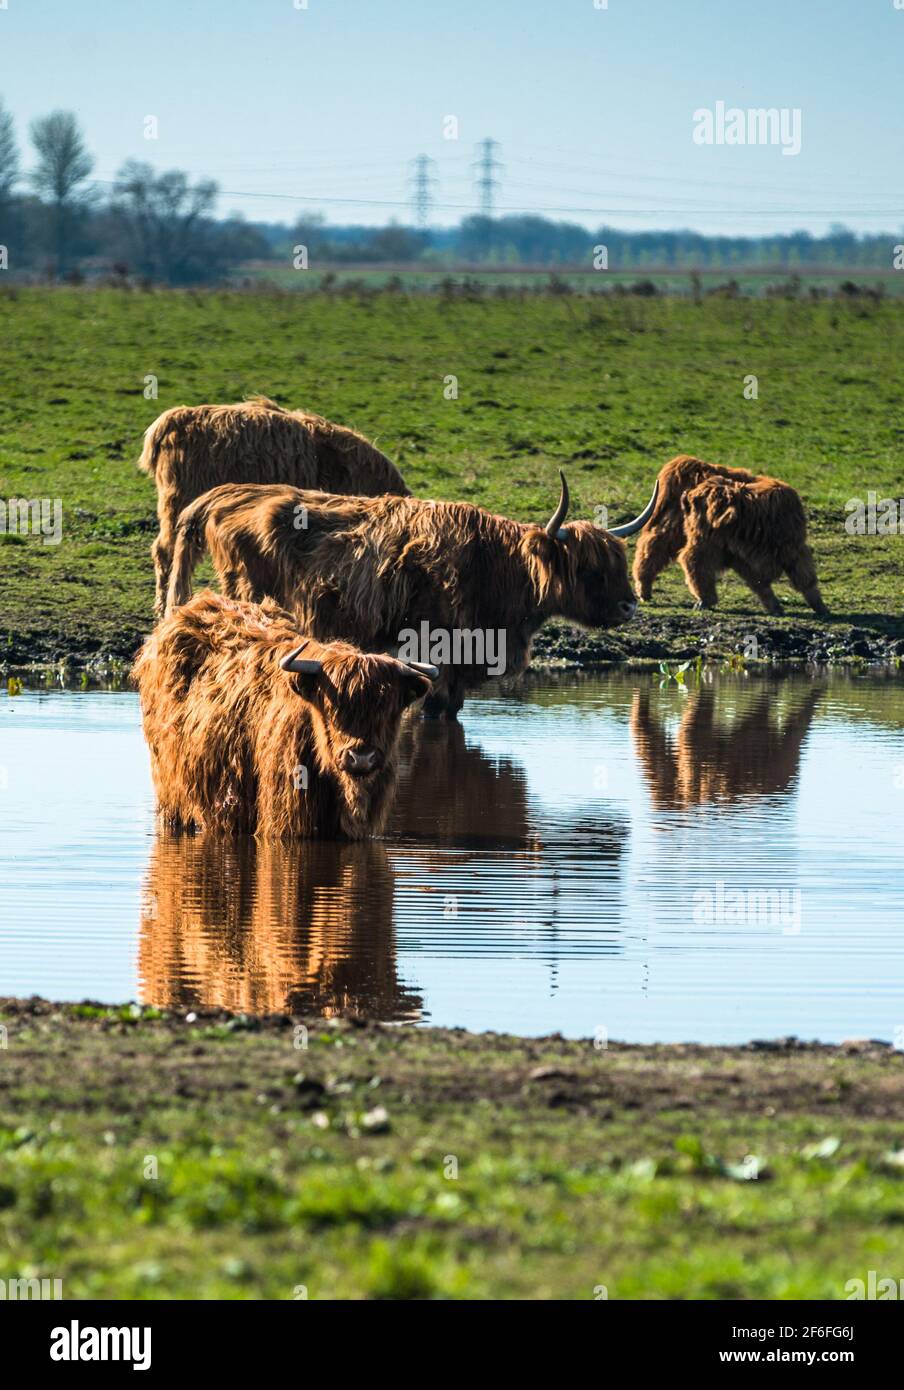 Highland cattle grazing on Wicken Fen Nature Reserve in Cambridgeshire, East Anglia, England, UK. Stock Photo